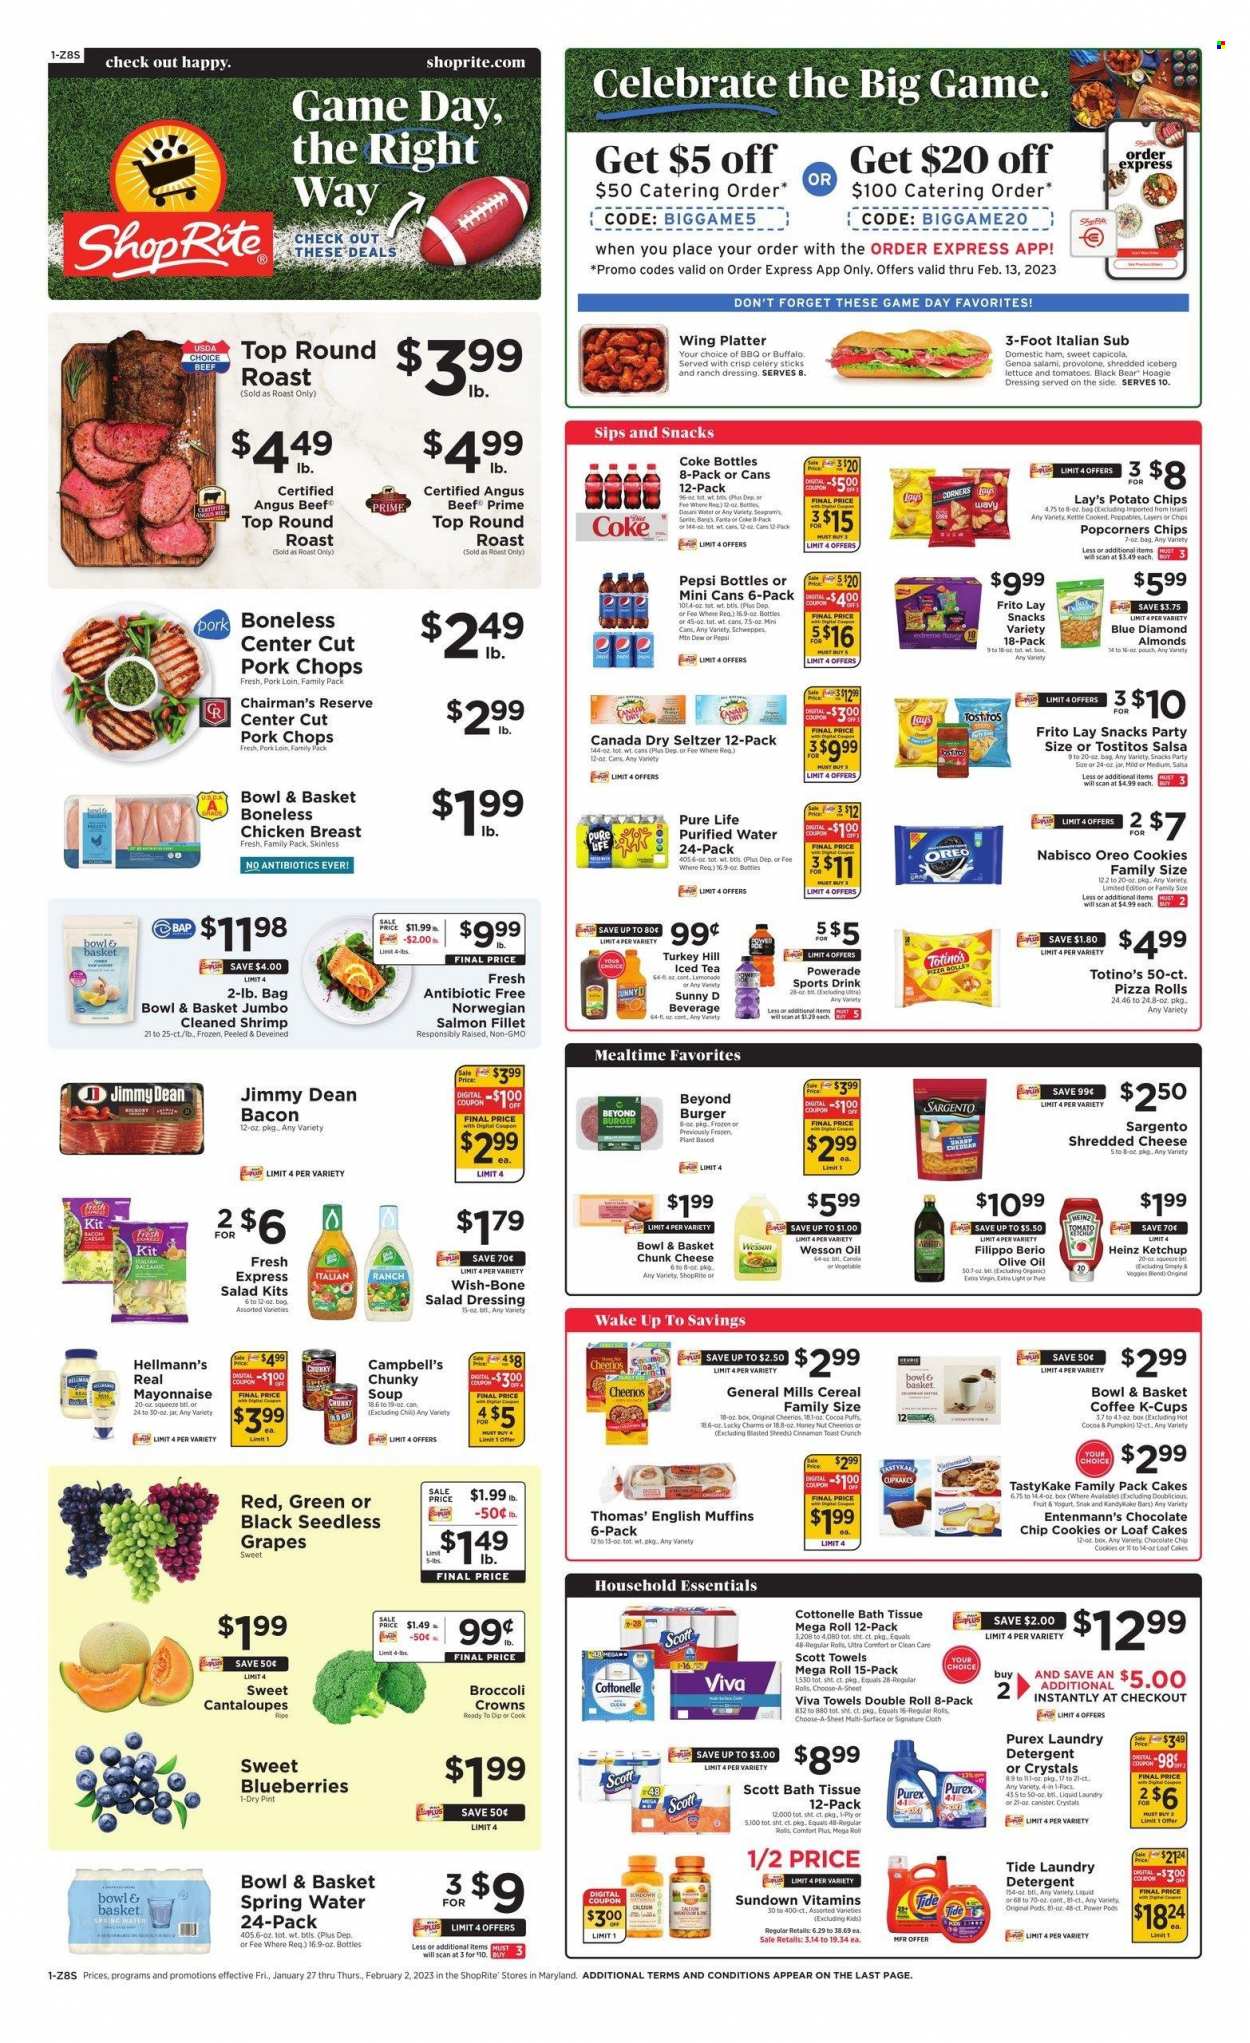 thumbnail - ShopRite Flyer - 01/27/2023 - 02/02/2023 - Sales products - english muffins, cake, pizza rolls, Bowl & Basket, puffs, Entenmann's, cantaloupe, lettuce, blueberries, grapes, seedless grapes, salmon, salmon fillet, shrimps, Campbell's, pizza, soup, Jimmy Dean, salami, ham, shredded cheese, chunk cheese, Provolone, Sargento, Oreo, yoghurt, mayonnaise, ranch dressing, Hellmann’s, cookies, potato chips, Lay’s, popcorn, Tostitos, celery sticks, Heinz, cereals, Cheerios, cinnamon, salad dressing, ketchup, dressing, salsa, extra virgin olive oil, olive oil, oil, almonds, Blue Diamond, Canada Dry, Coca-Cola, lemonade, Schweppes, Sprite, Powerade, Pepsi, Fanta, ice tea, seltzer water, spring water, purified water, hot cocoa, coffee, coffee capsules, K-Cups, chicken breasts, beef meat, round roast, pork chops, pork loin, pork meat, bath tissue, Cottonelle, Scott, detergent, Tide, laundry detergent, Purex, calcium. Page 1.